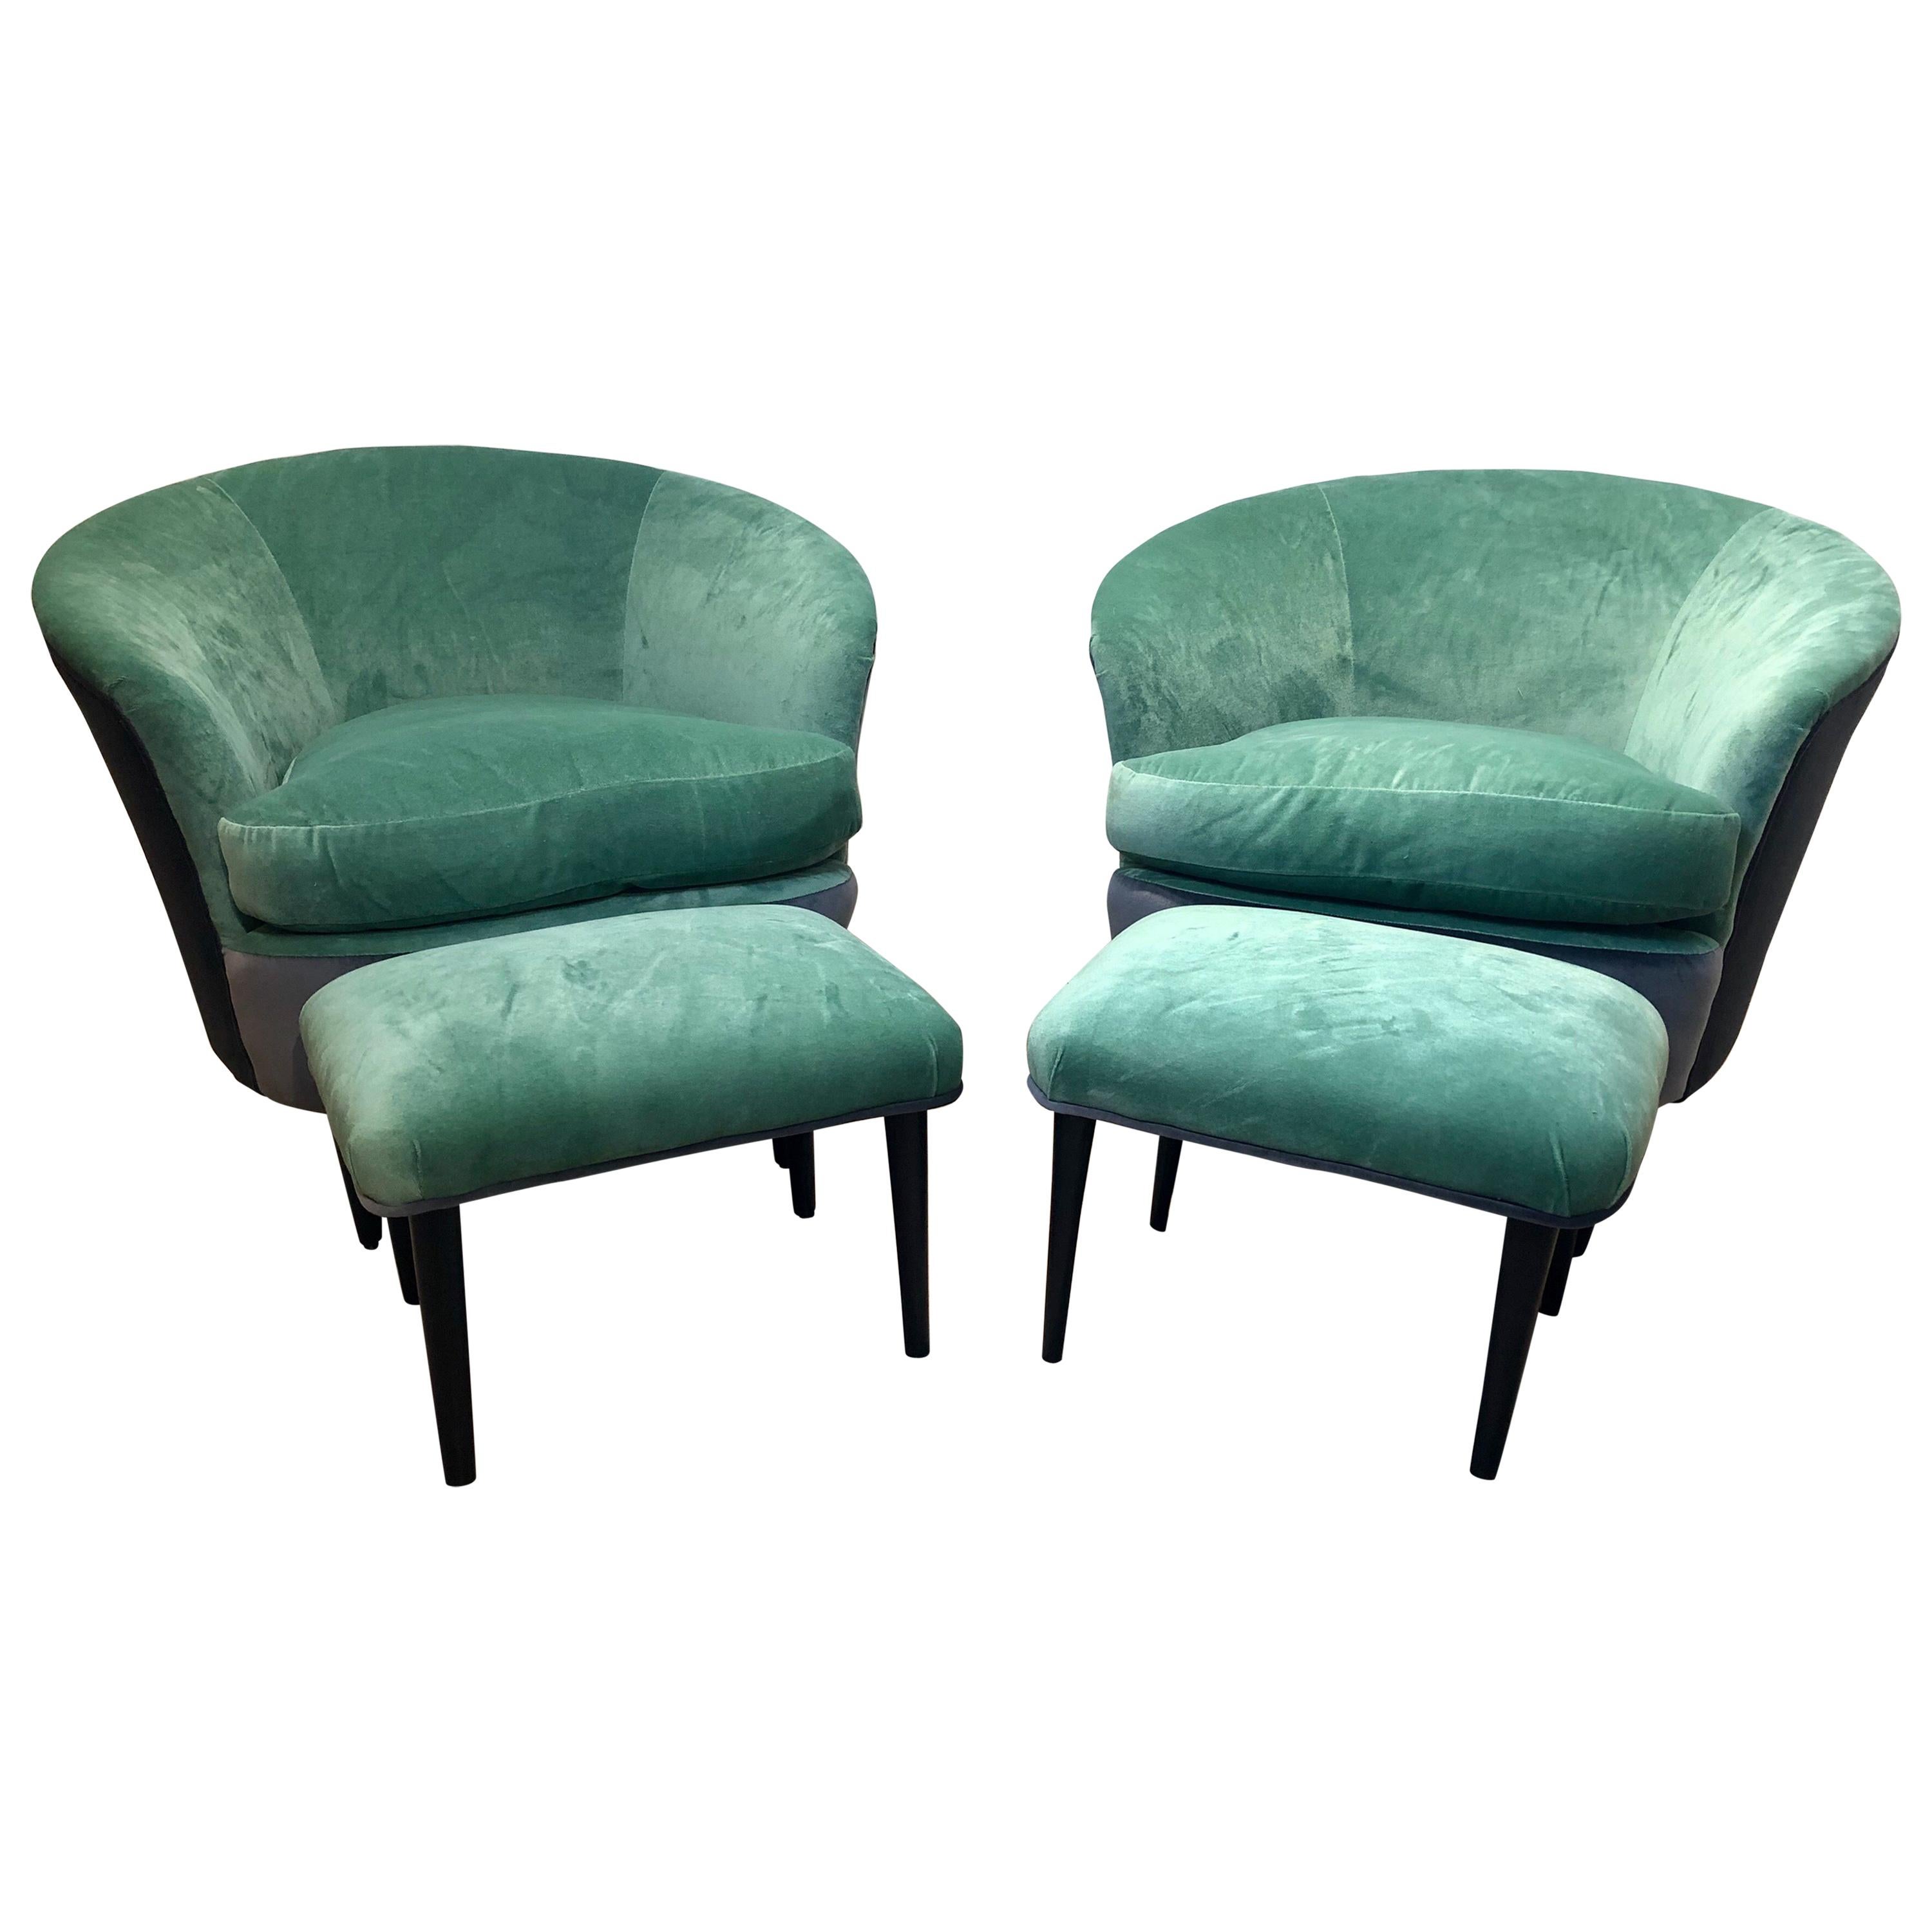 Pair of Italian Curved Chairs and Stools with Mint Green and Grey Upholstery